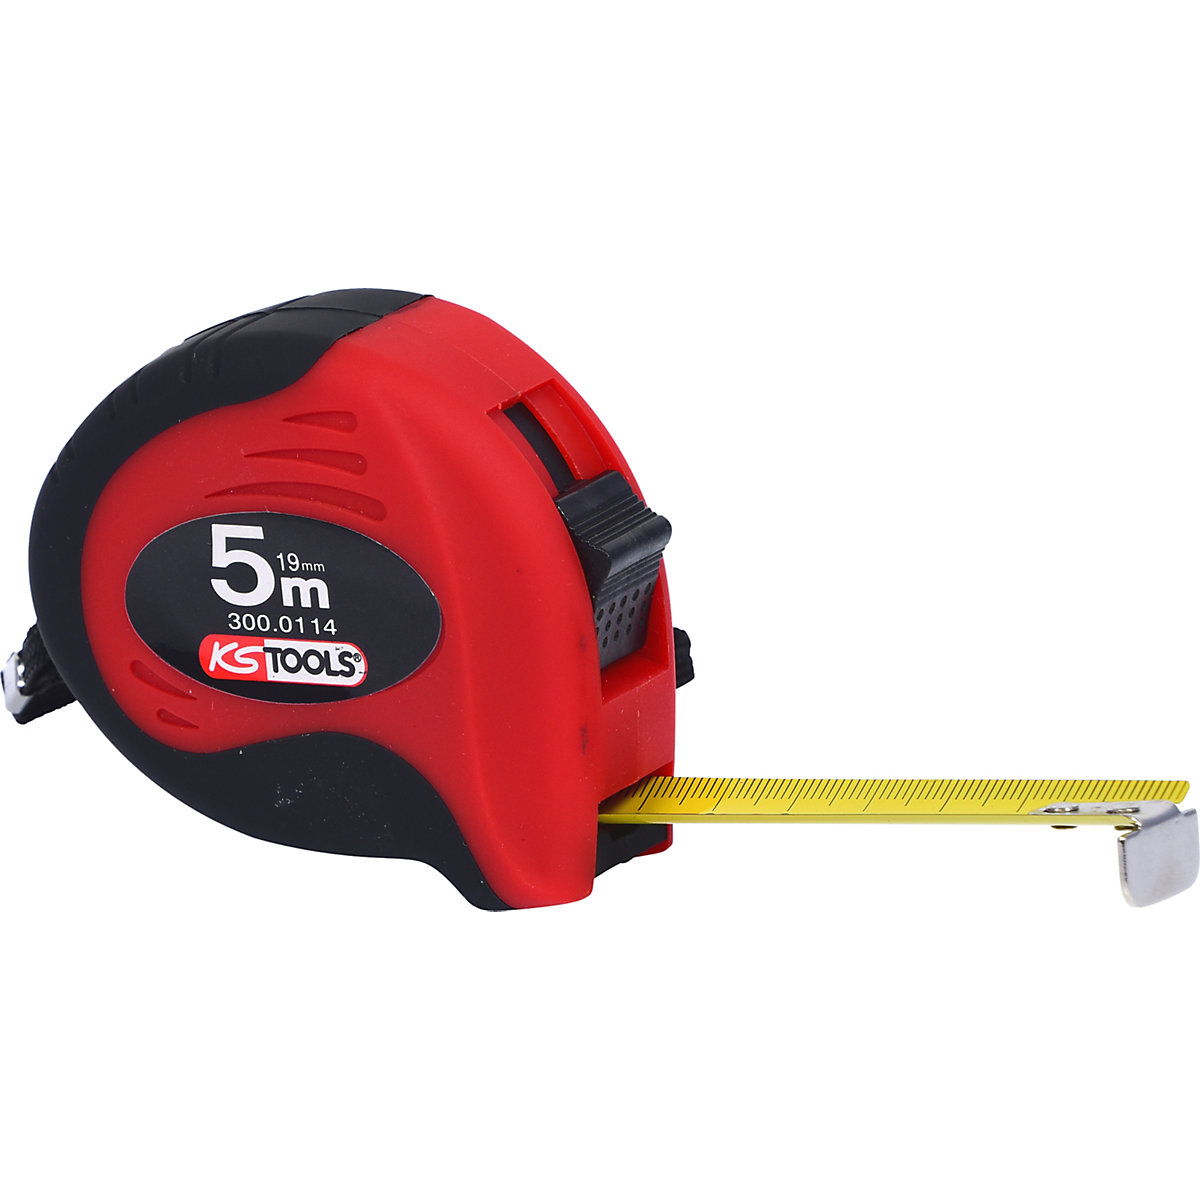 Measuring tape with stop – KS Tools